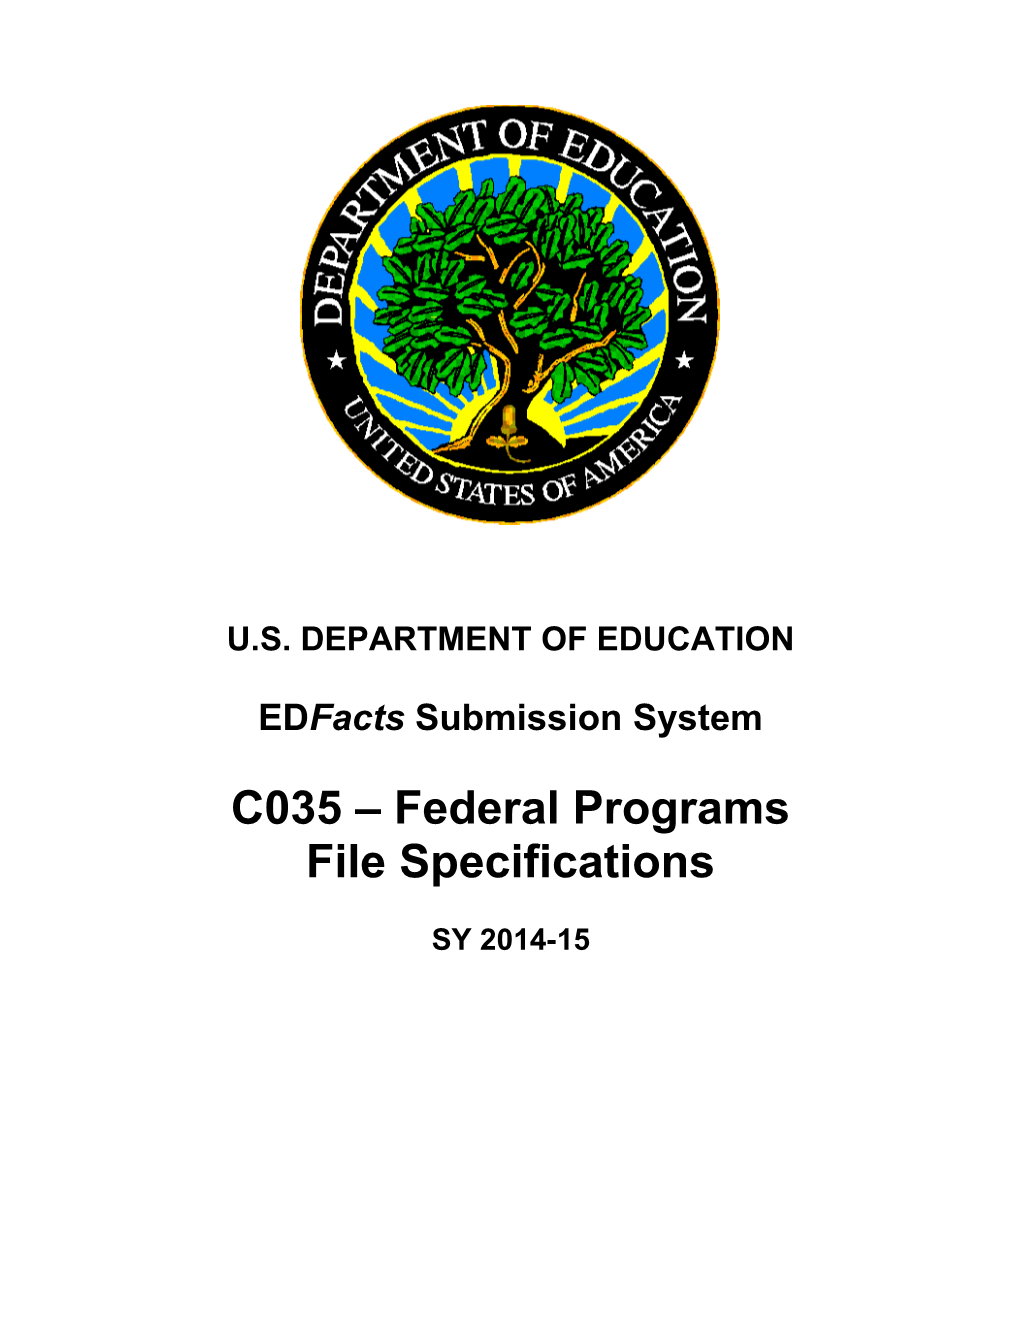 C035 - Federal Programs File Specifications (Msword)